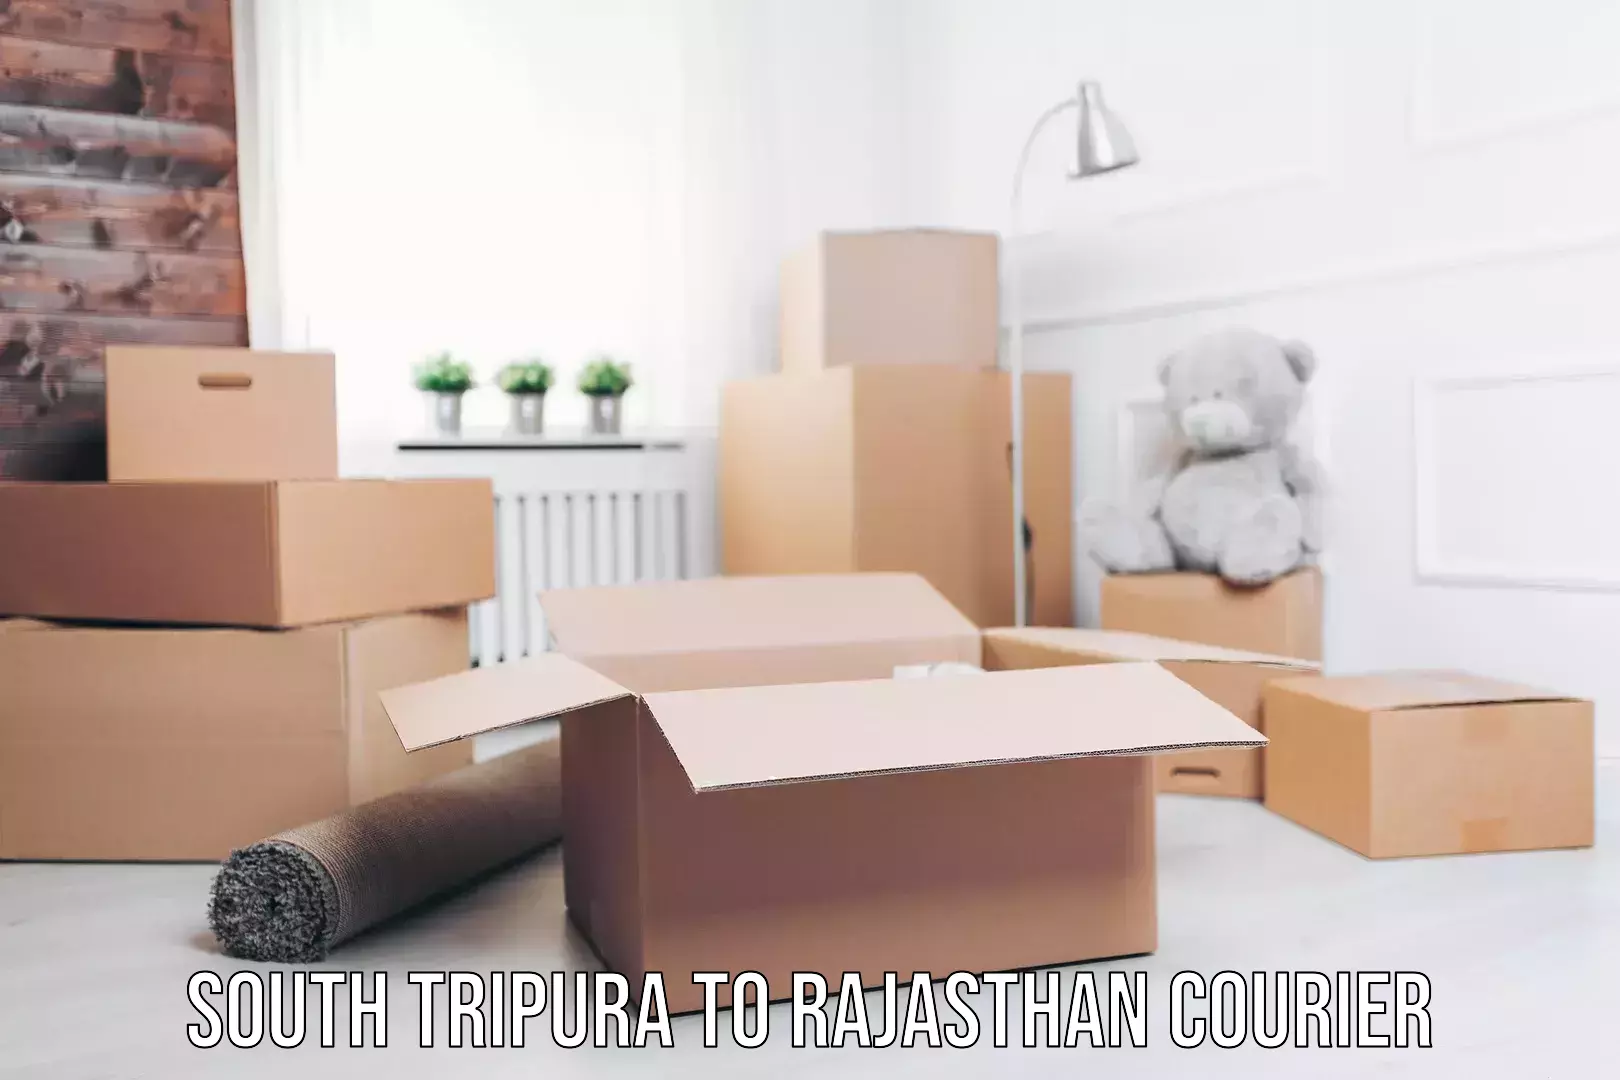 On-demand courier South Tripura to Rajasthan